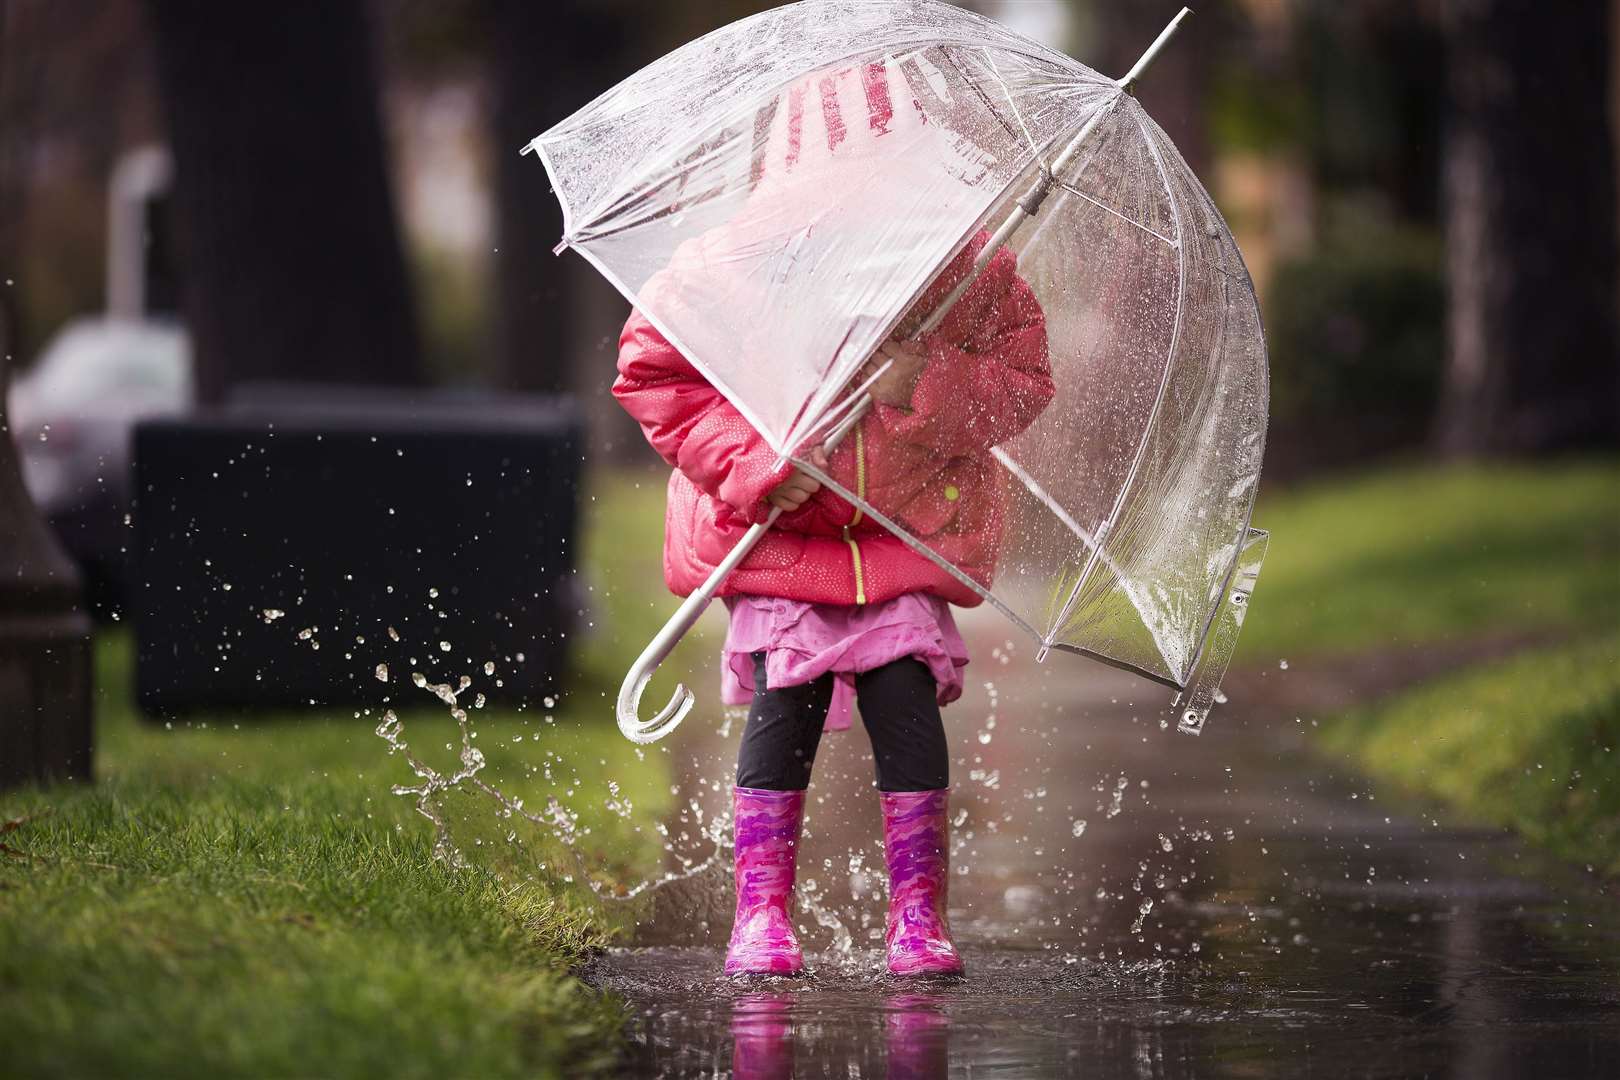 Brave the showers and aim to get the kids outside regularly anyway